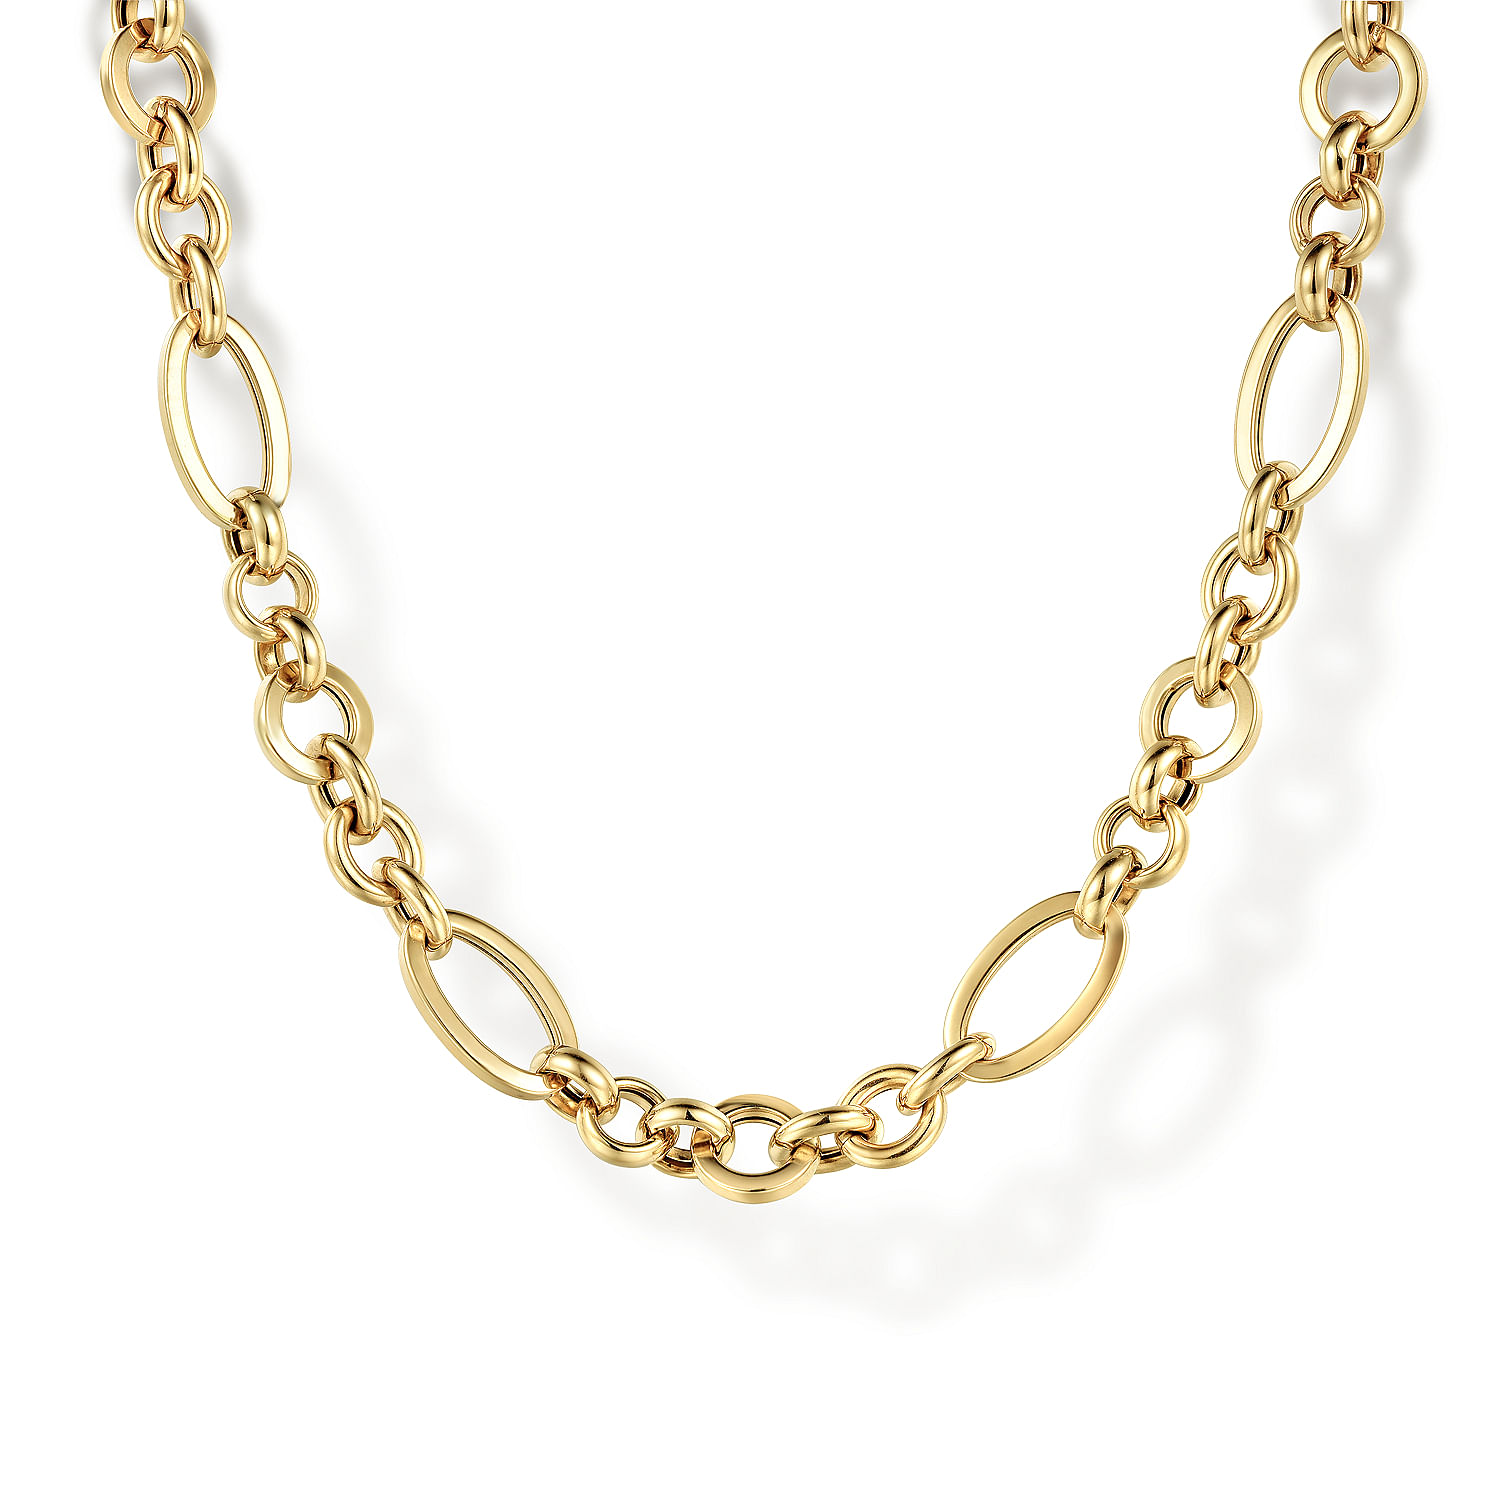 Gabriel - 14K Yellow Gold Link Chain Necklace with Oval Stations